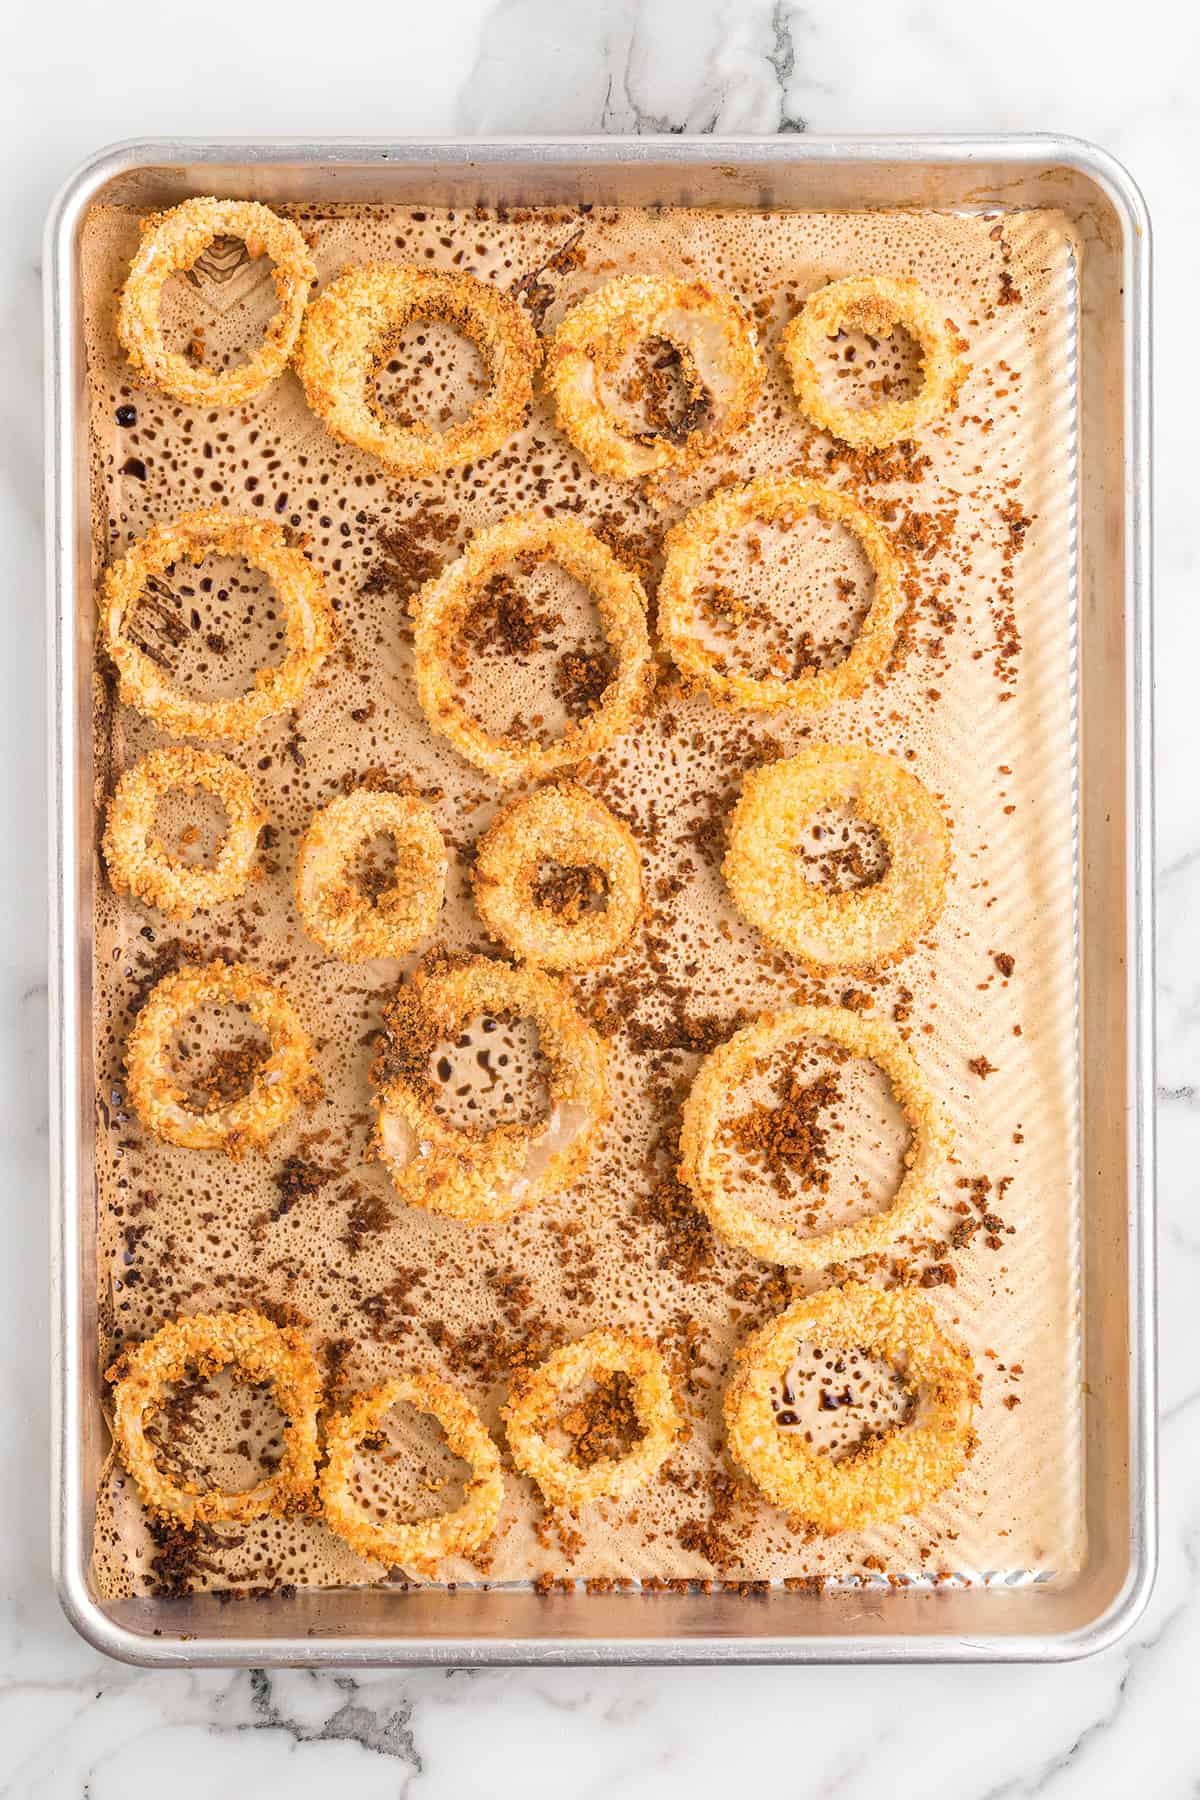 Baked onion rings on a baking pan.